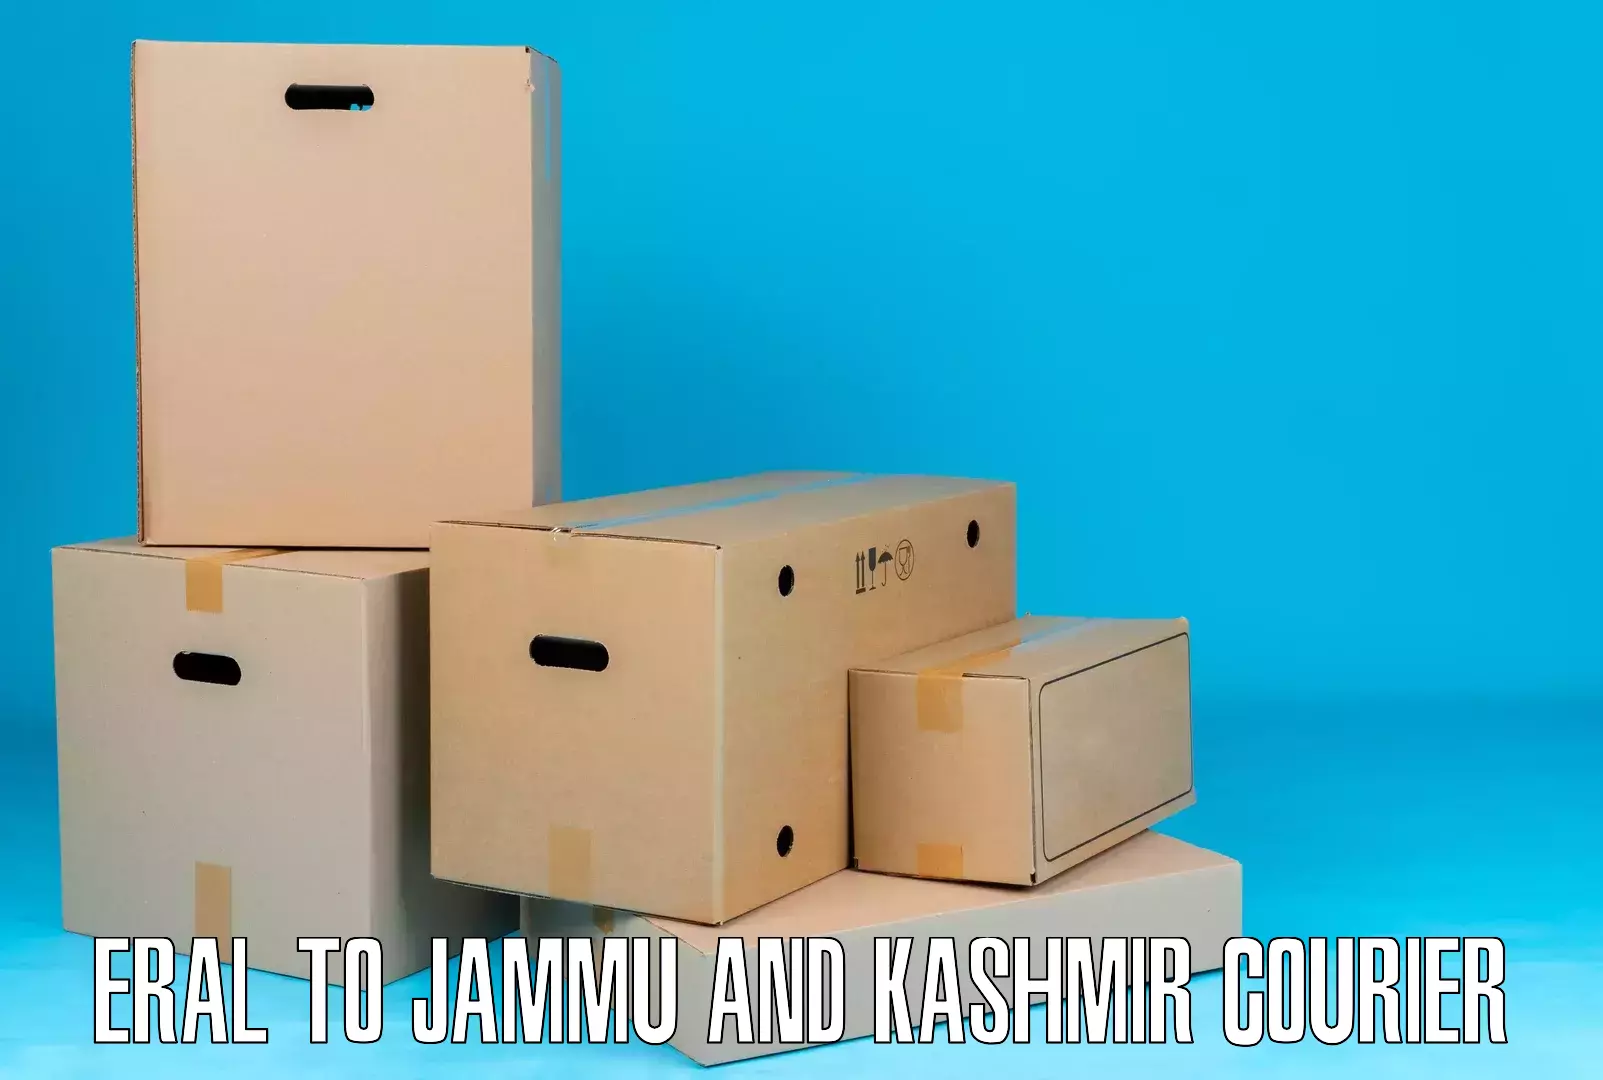 Weekend courier service Eral to Jammu and Kashmir